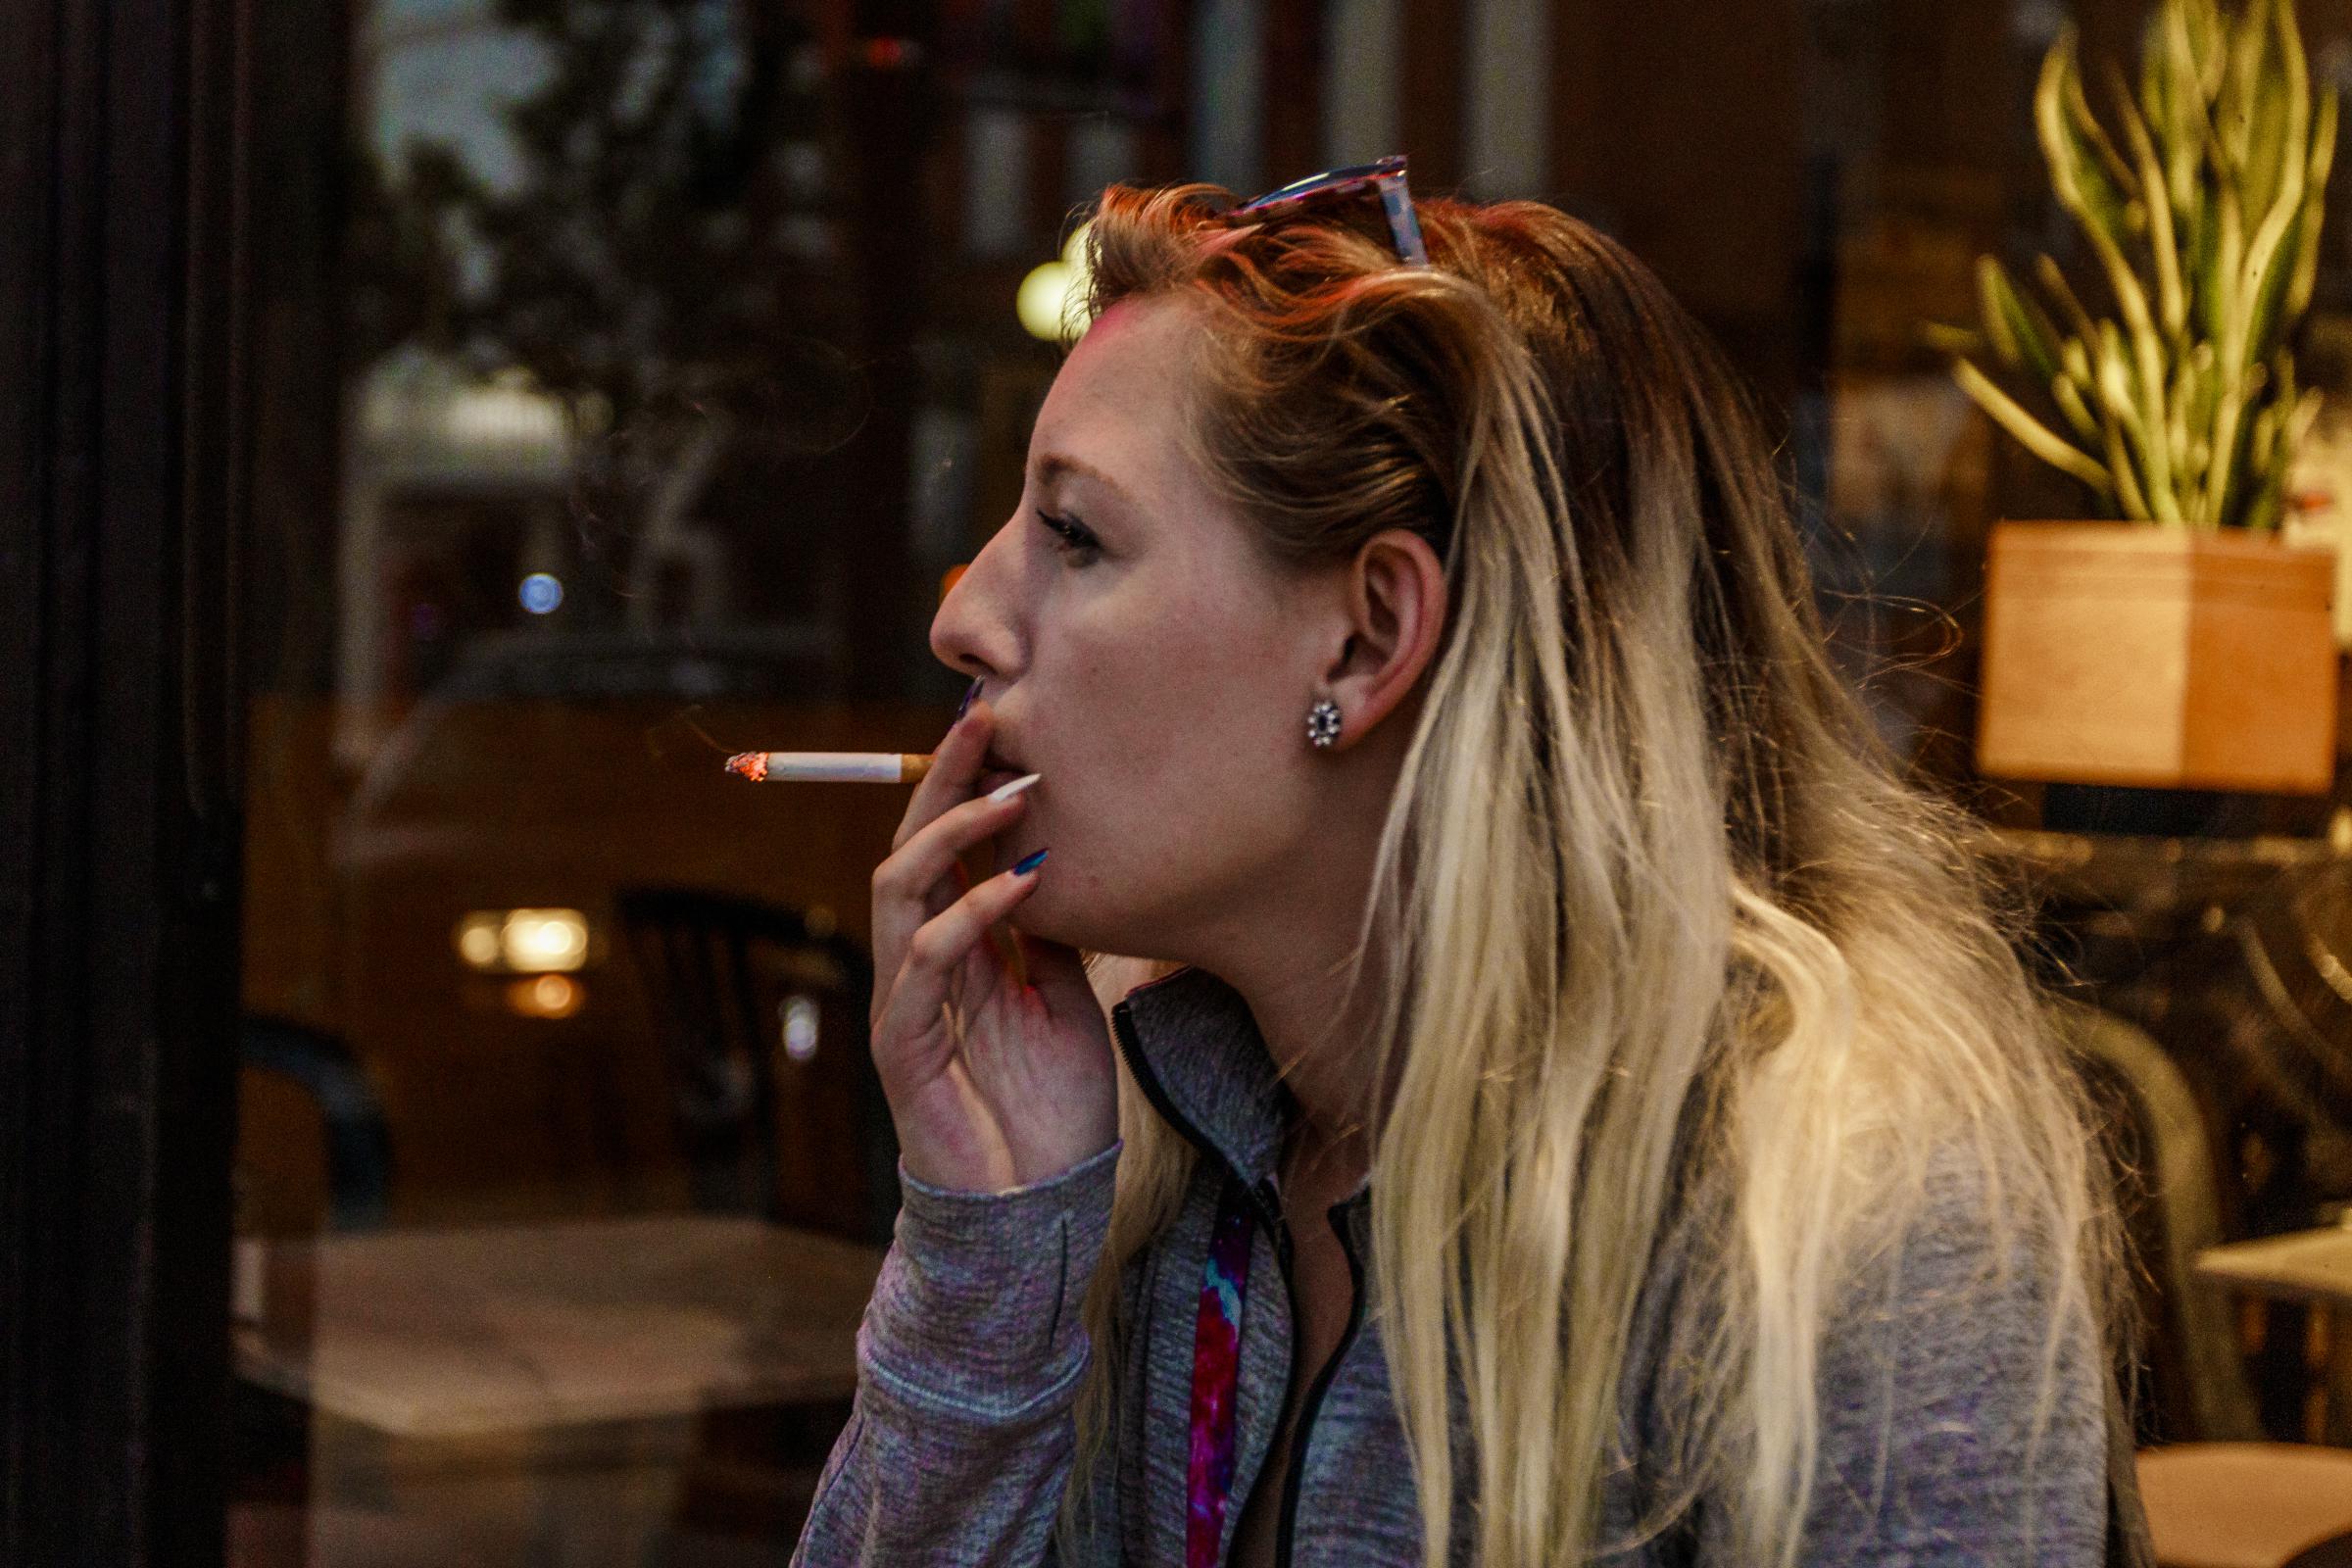 Smoking Ban 10 Years Later More Acceptance But Businesses Still